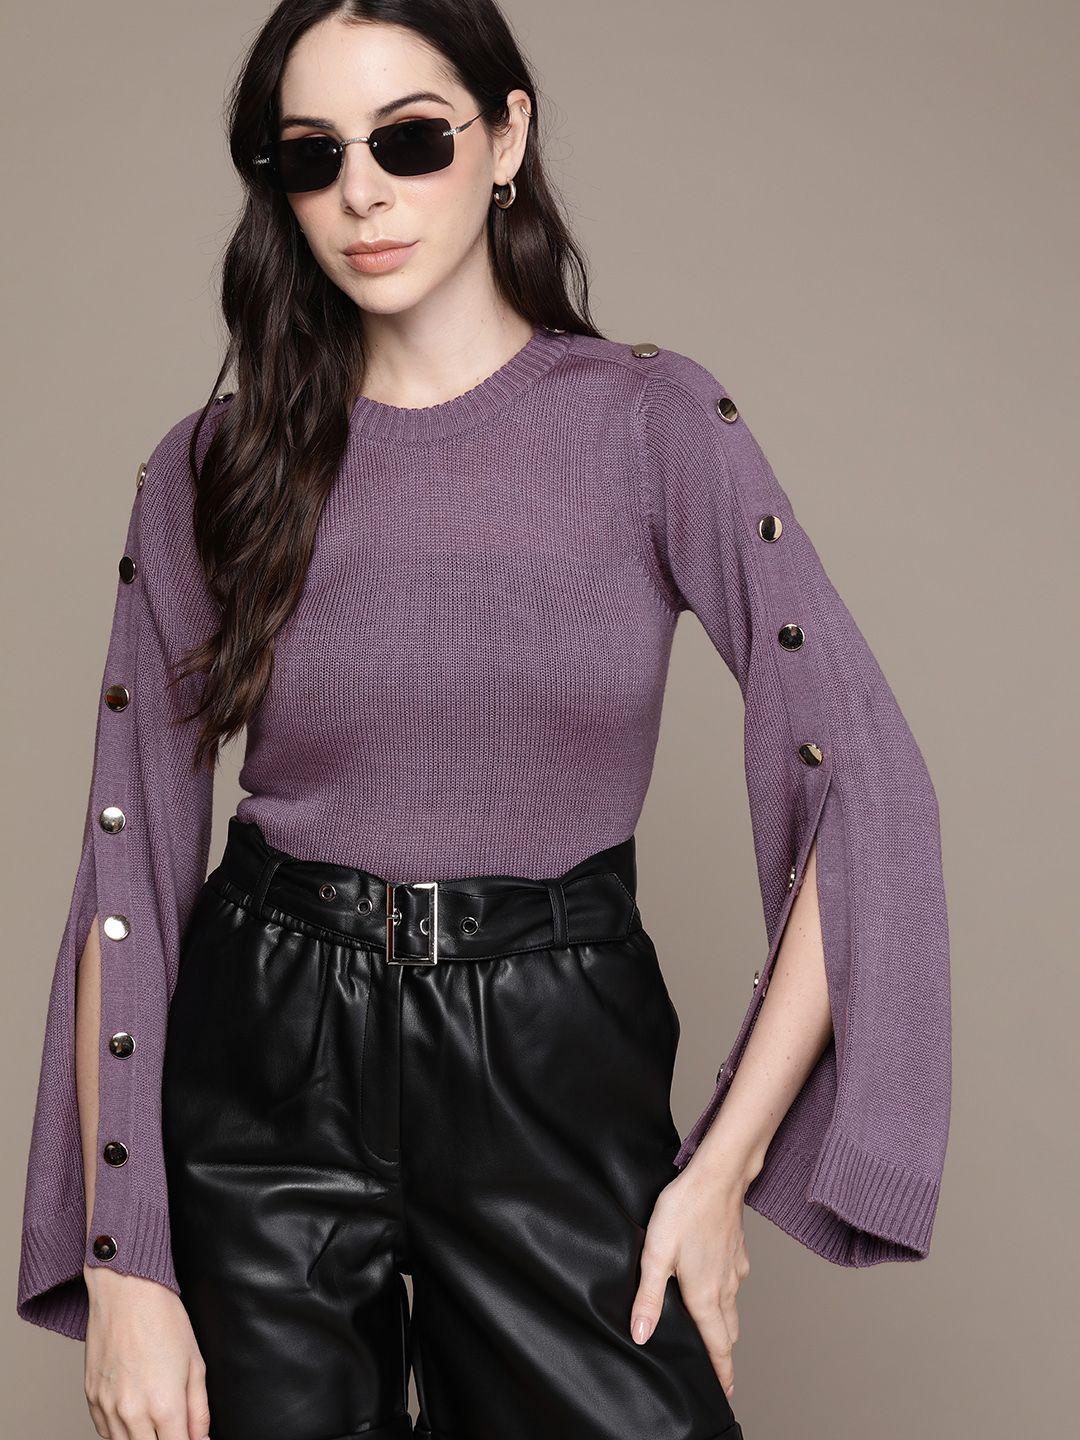 the-roadster-lifestyle-co.-long-flared-slit-sleeves-button-detail-pullover